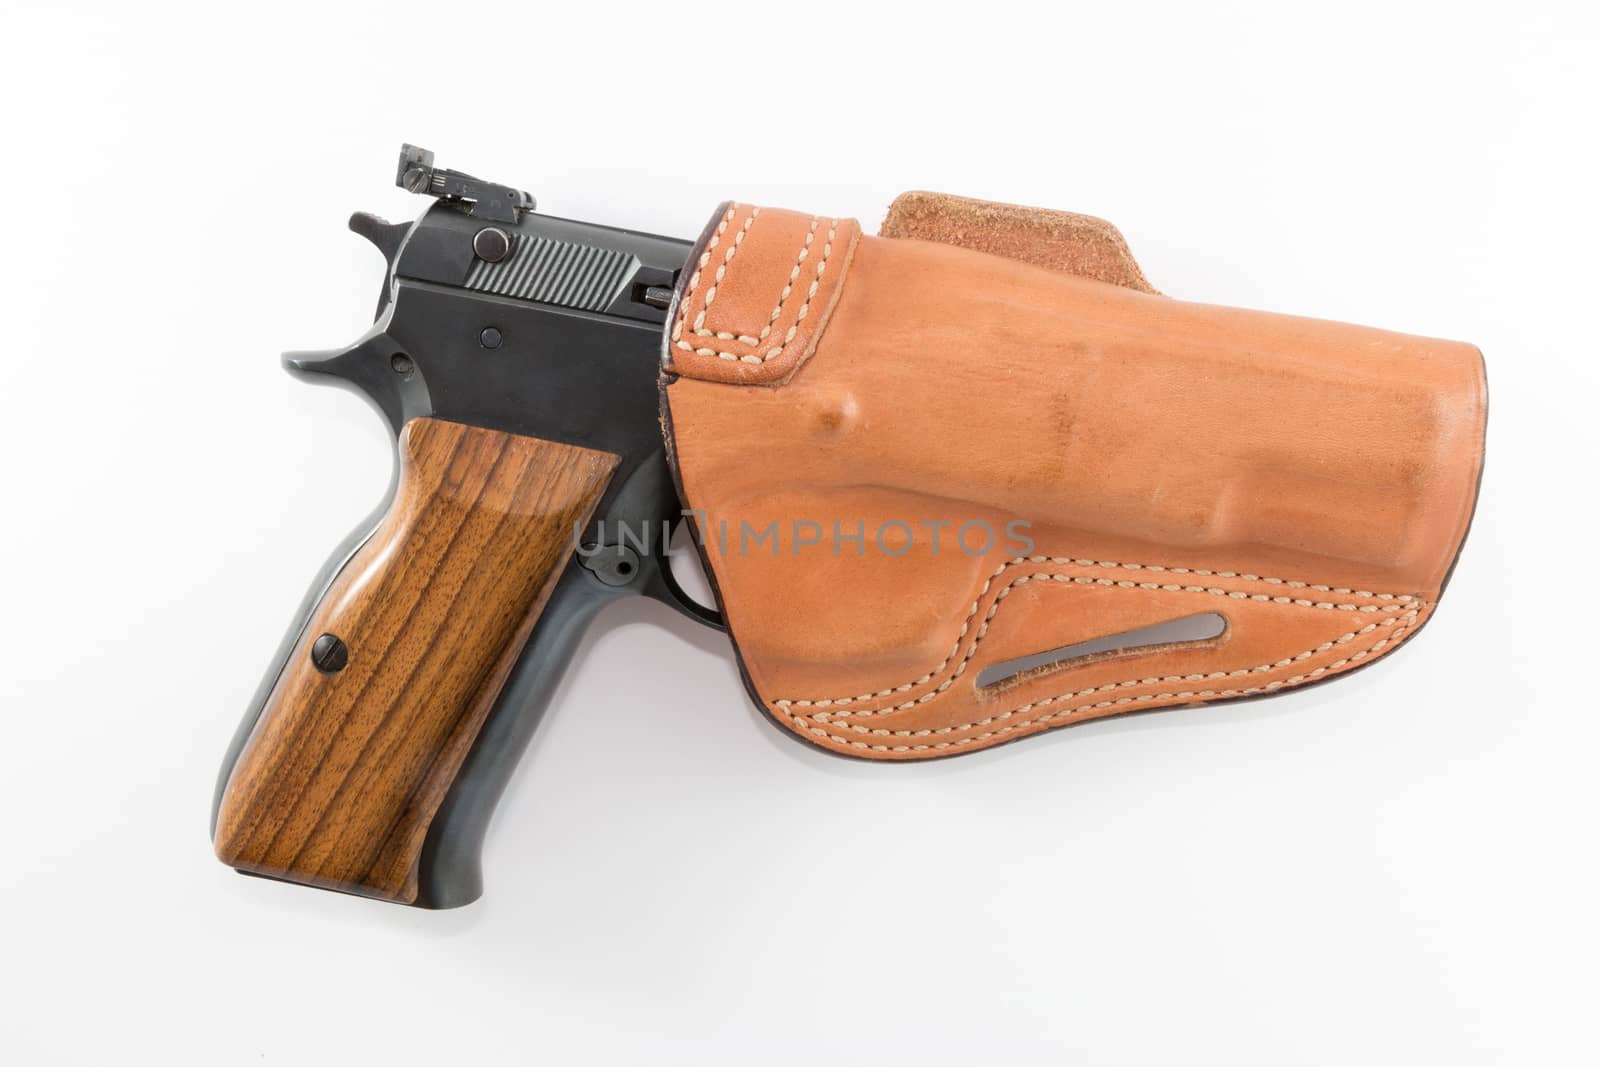 9mm pistol in brown leather holster by MarkDw